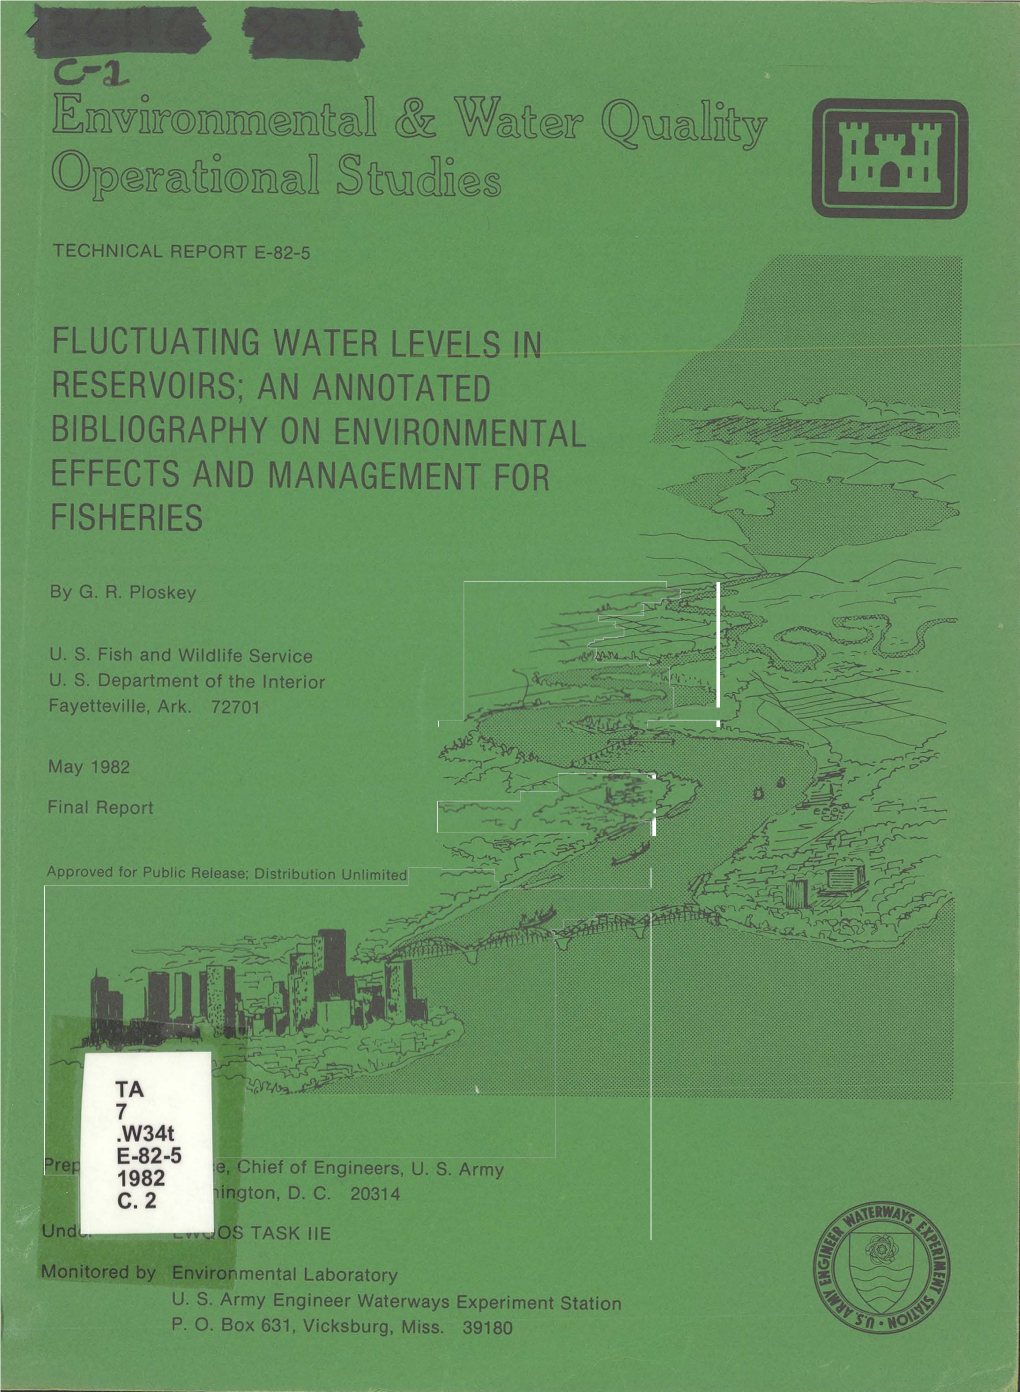 Fluctuating Water Levels in Reservoirs; an Annotated Bibliography on Environmental Effects and Management for Fisheries